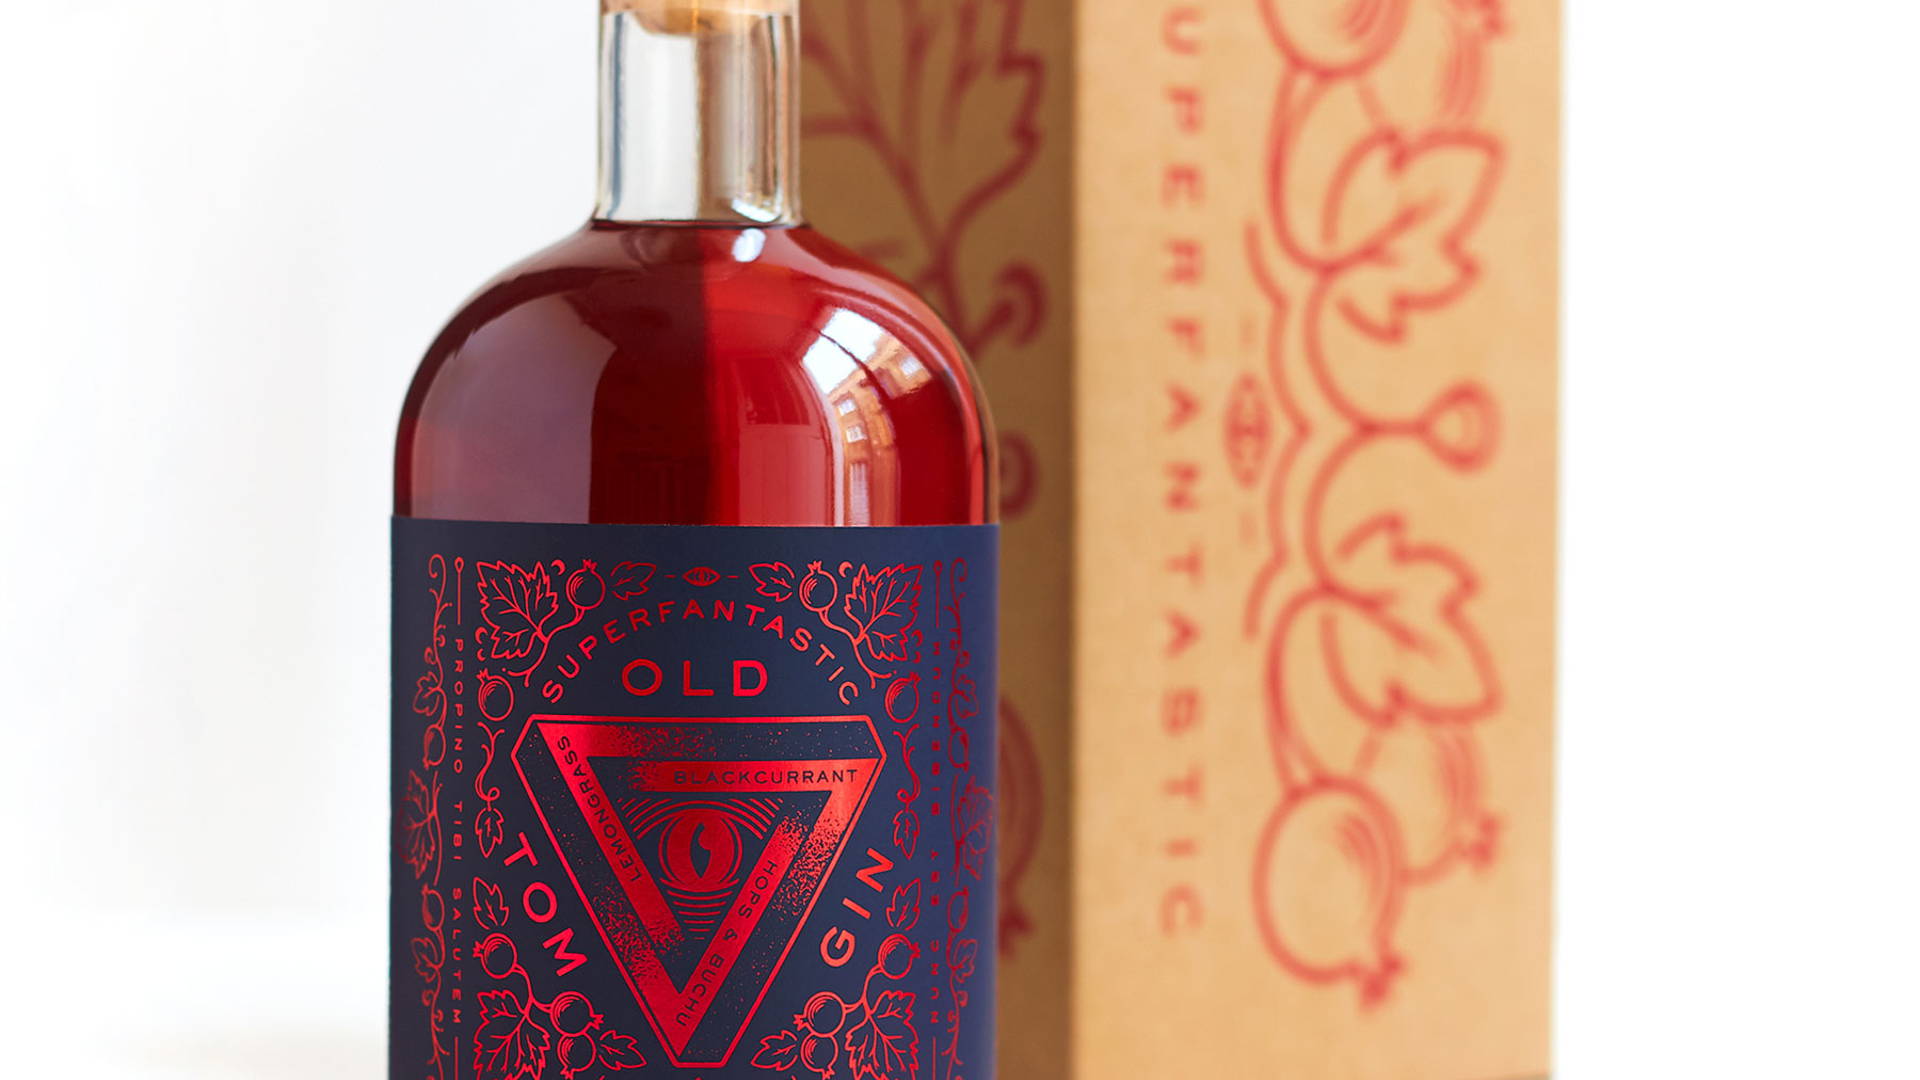 Featured image for Old Tom Gin Pays Tribute To The London Gin Craze With Striking Packaging